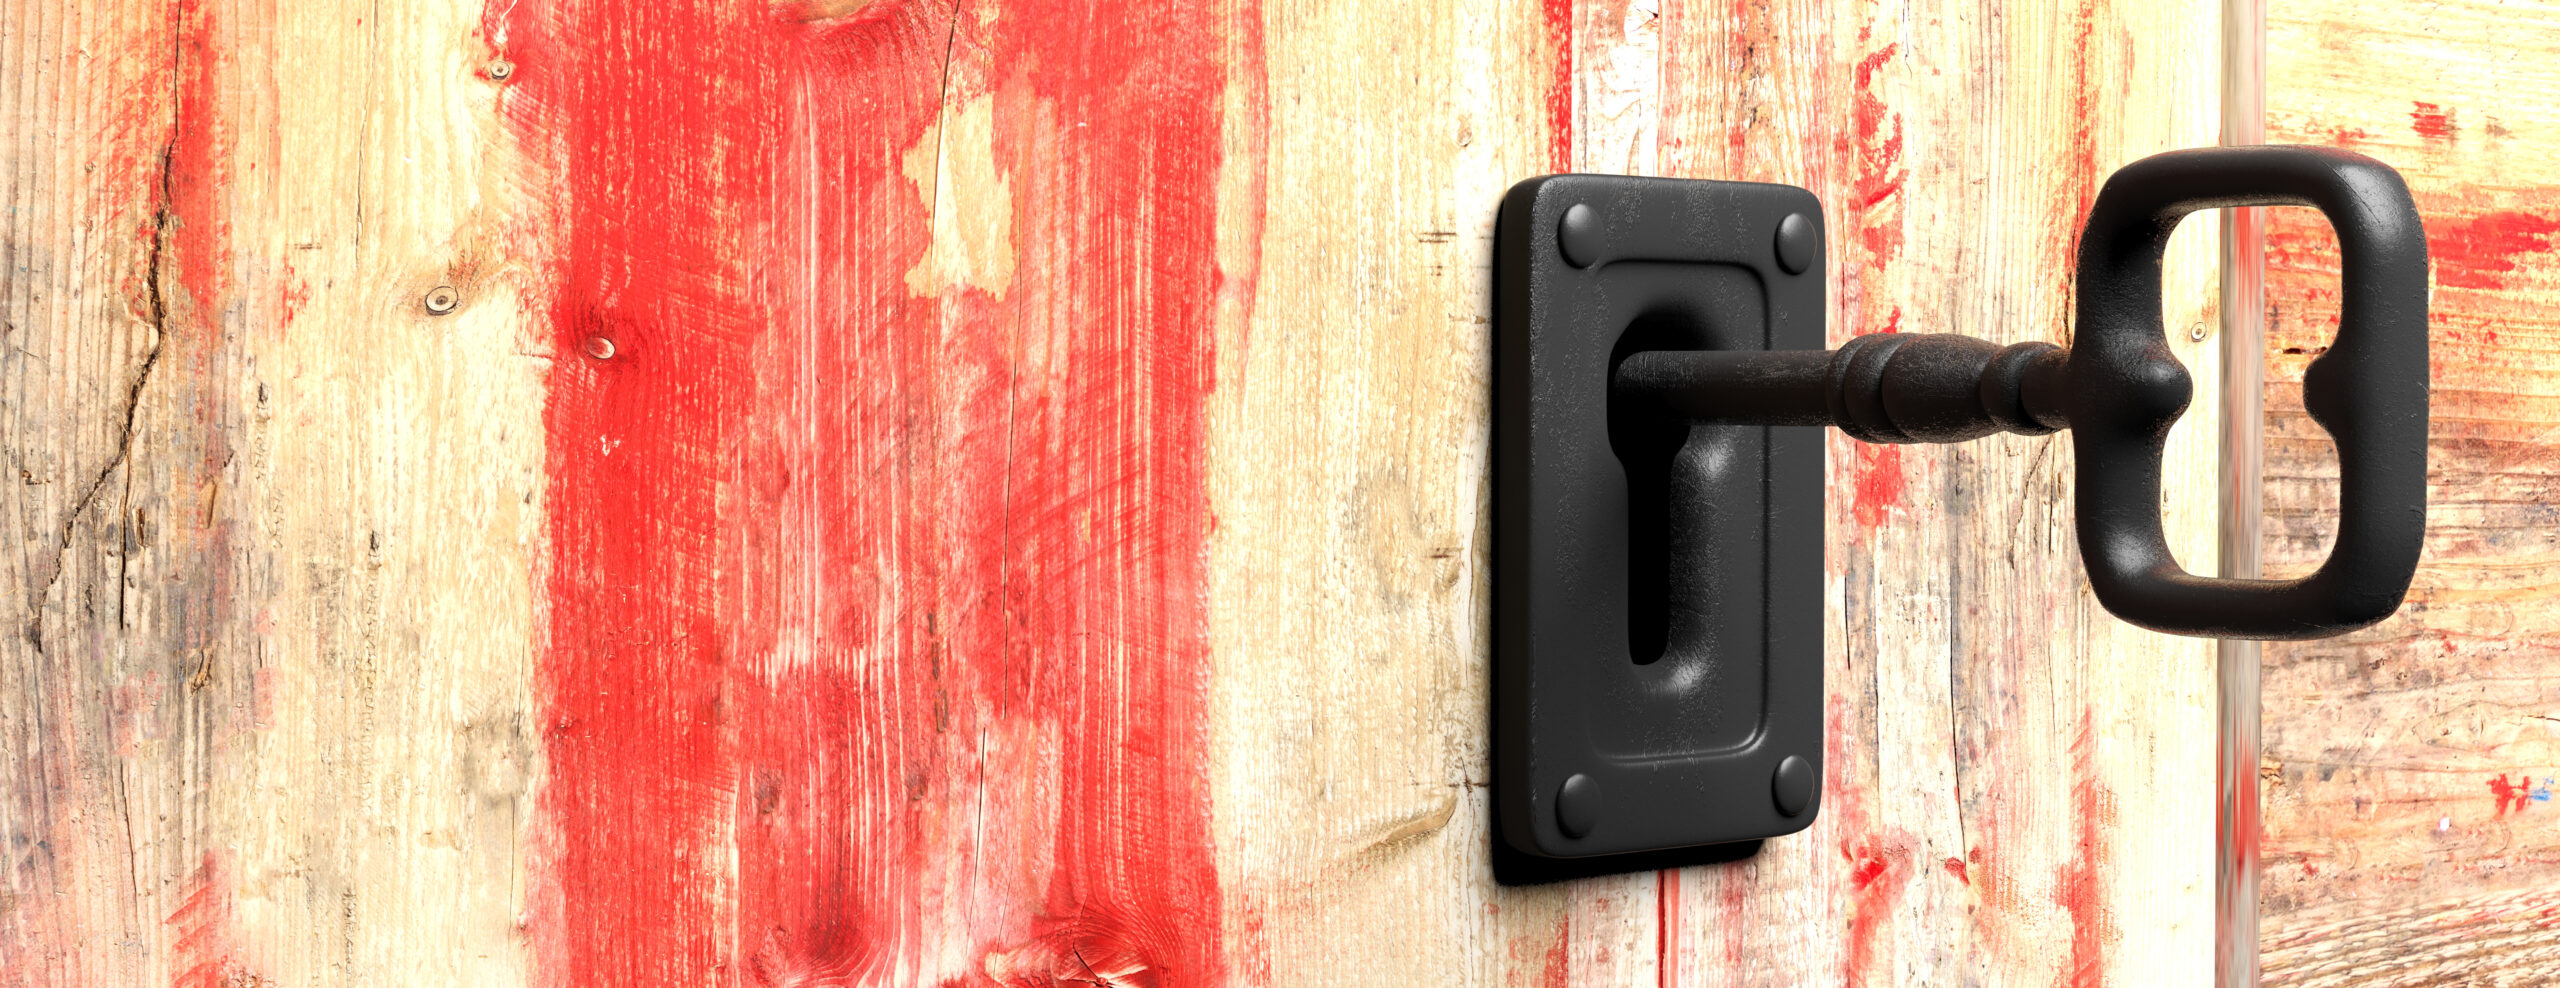 Key in a keyhole. Red wooden background. 3d illustration